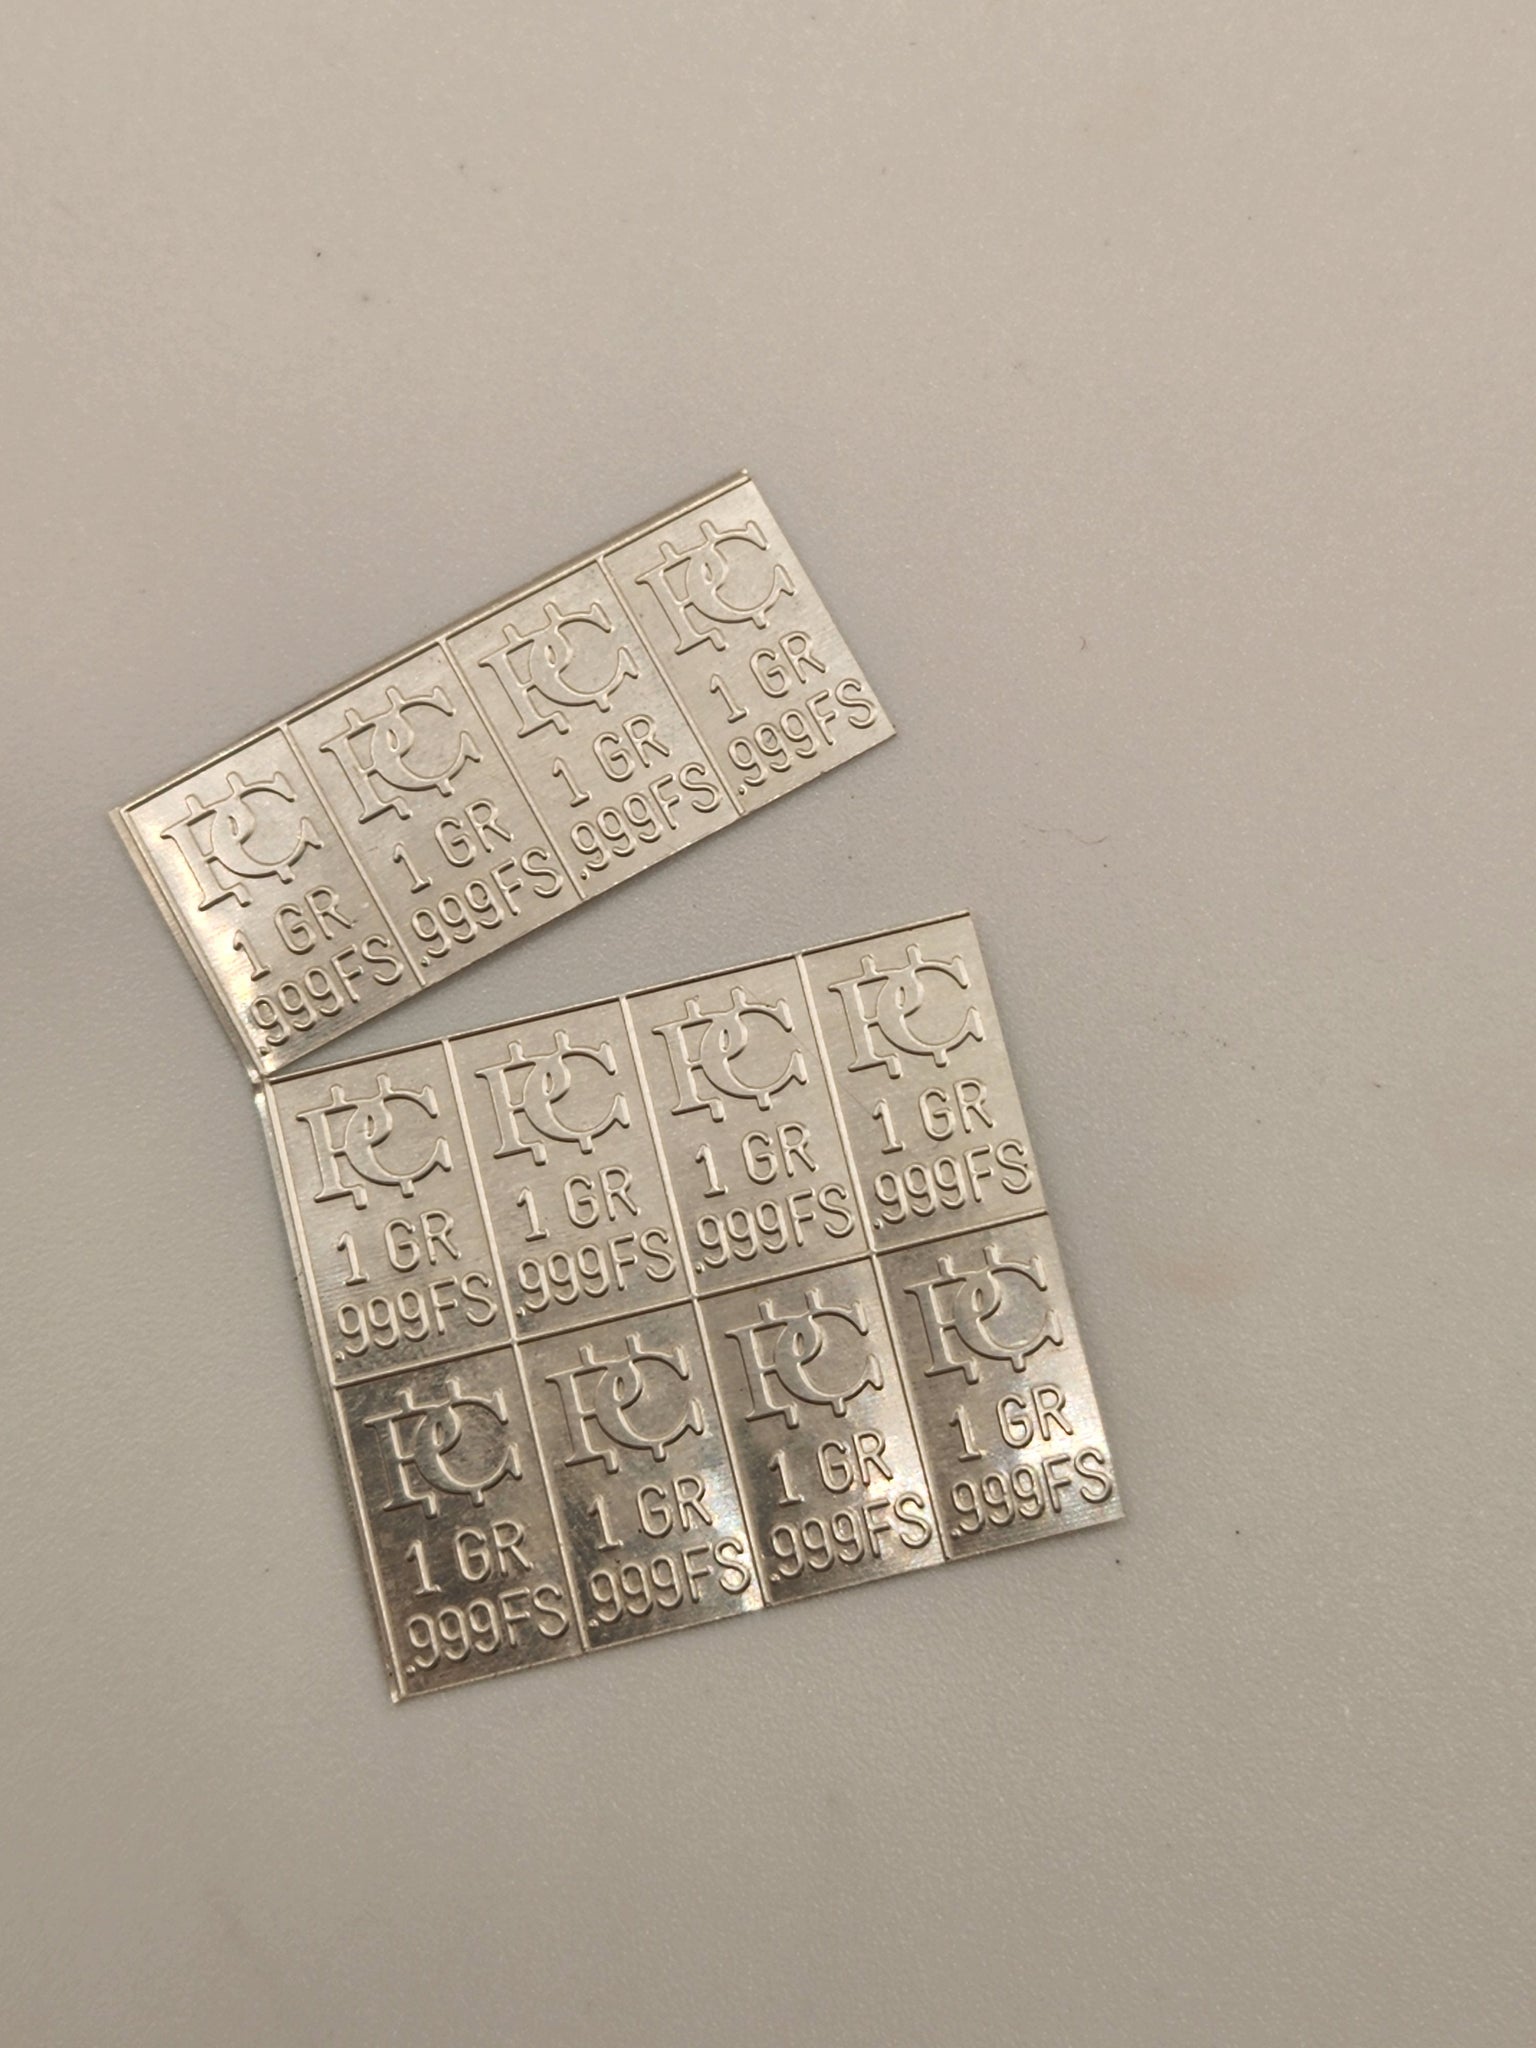  10 One Gram Pure Silver Bullion Bar Divides to 15 One Grain  Bars .999 Fine Silver Snaps Apart to Individual 1 Grain Ingots : ספורט  ופעילות בחיק הטבע